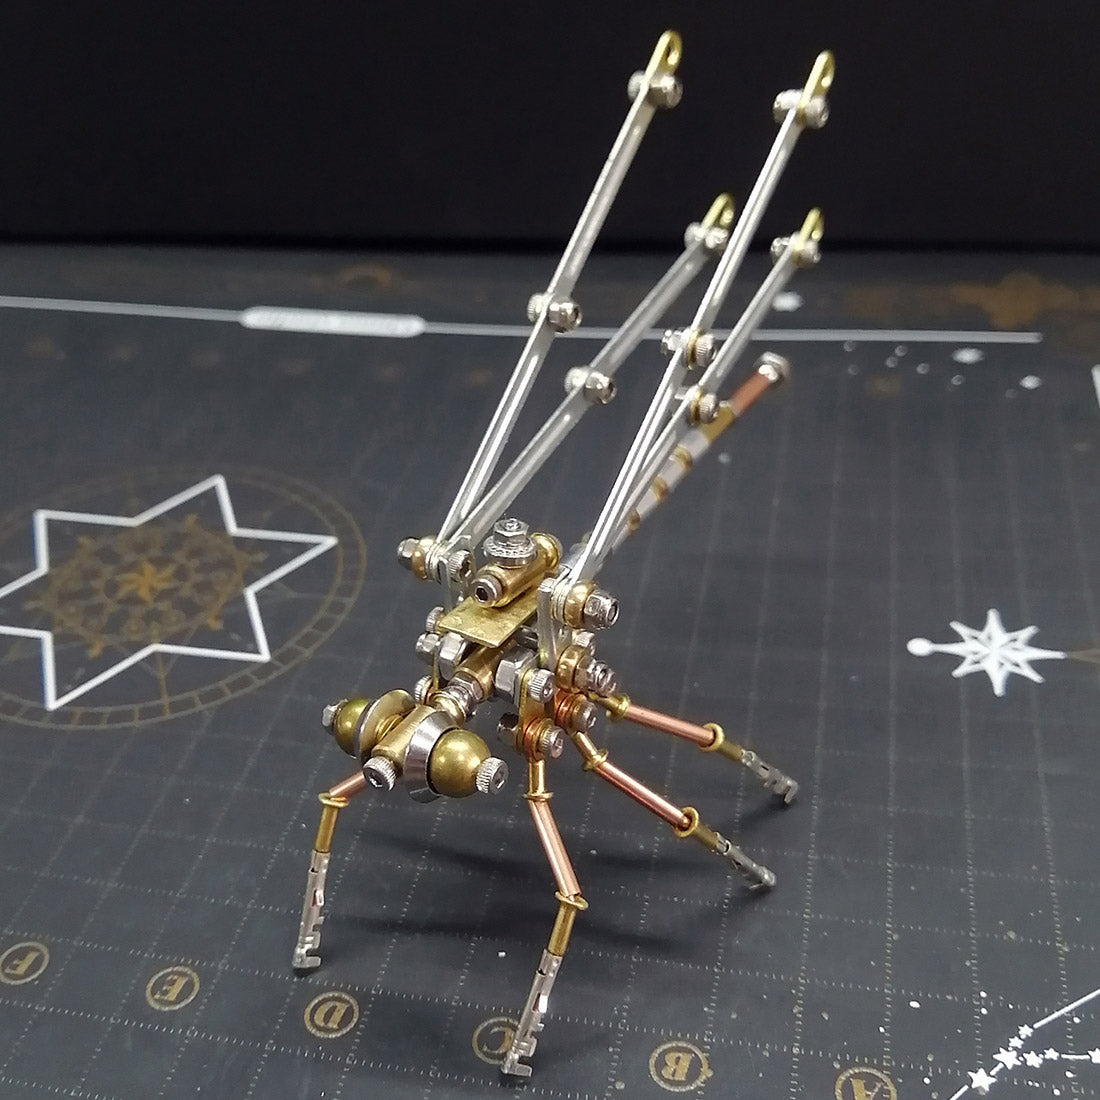 3D DIY Steampunk Insect Damselfly Metal Mode Building Kit Toy